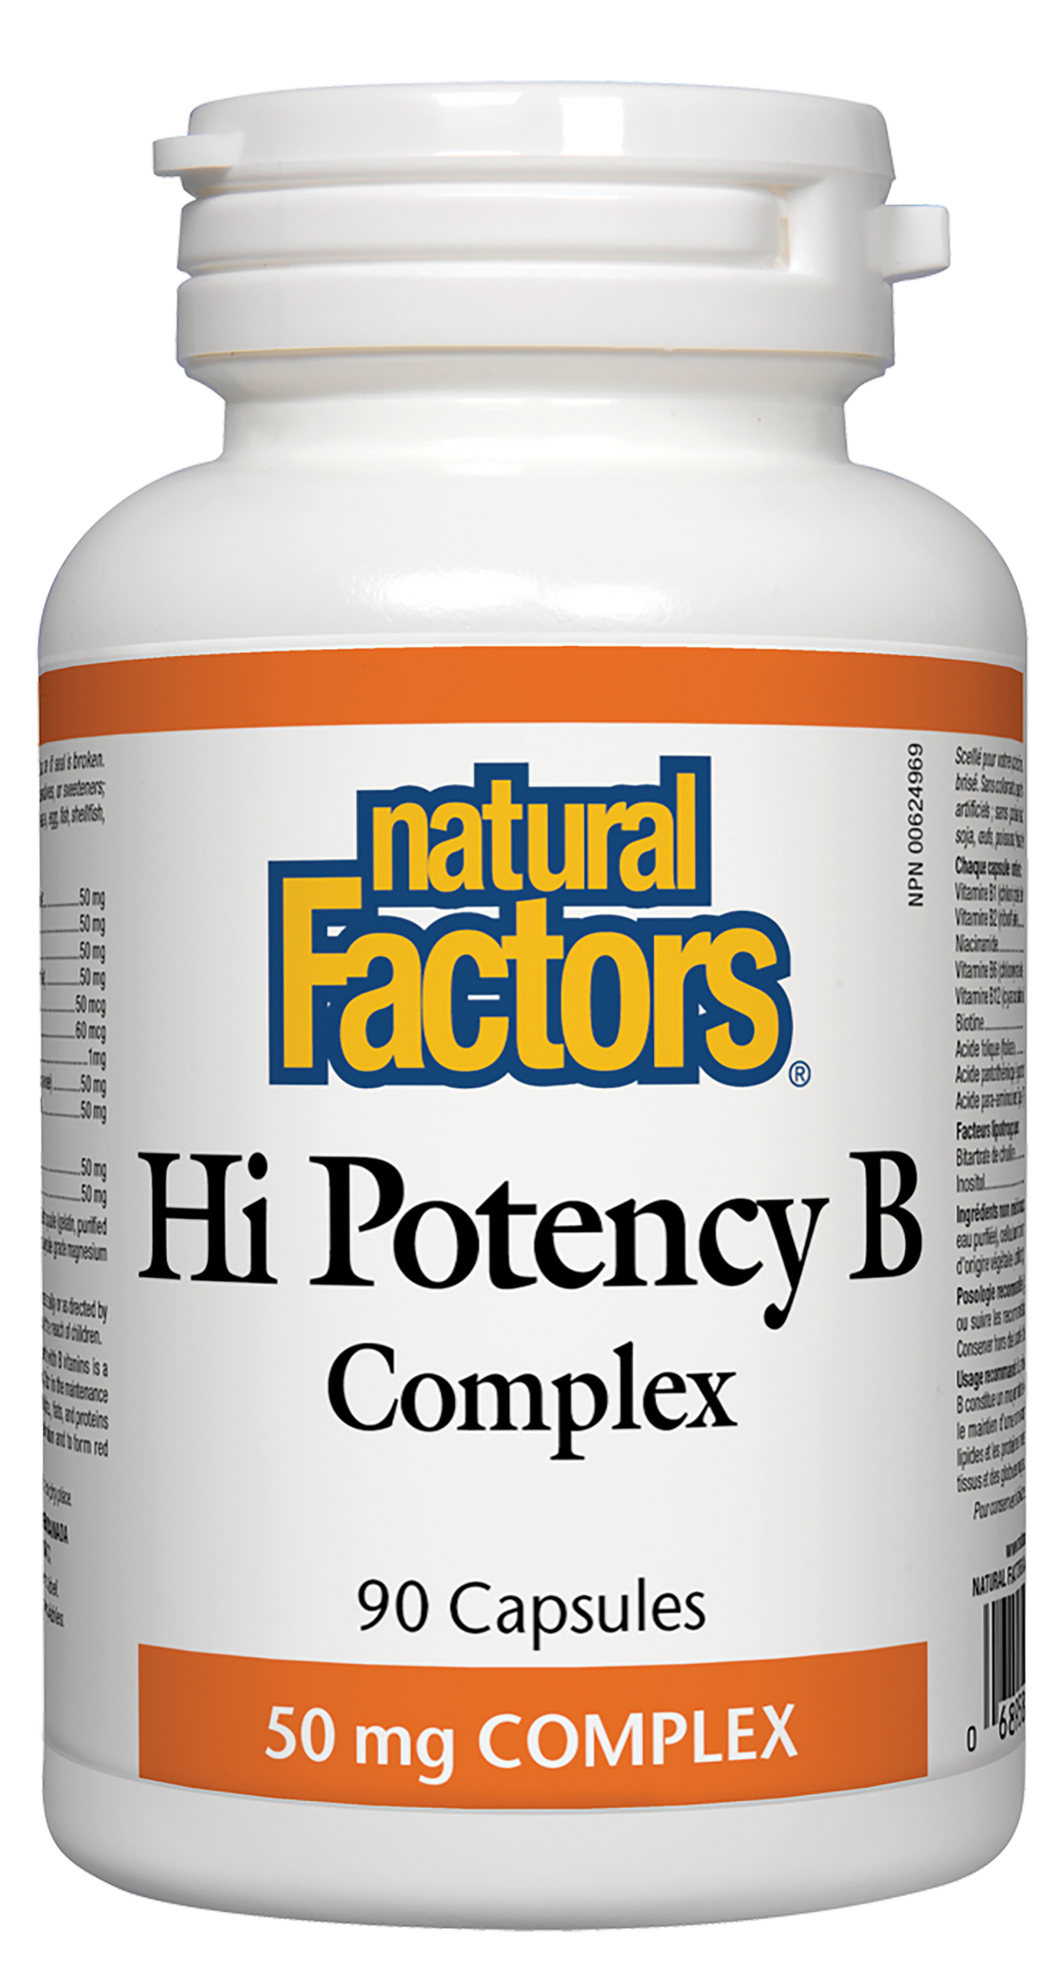 Natural Factors Hi Potency B Complex is a one-per-day formula that provides the full spectrum of all essential B vitamins. Each capsule contains a 50 mg potency that enhances energy levels by helping the body metabolize carbohydrates, proteins, and fats, as well as supporting red blood cell formation. 